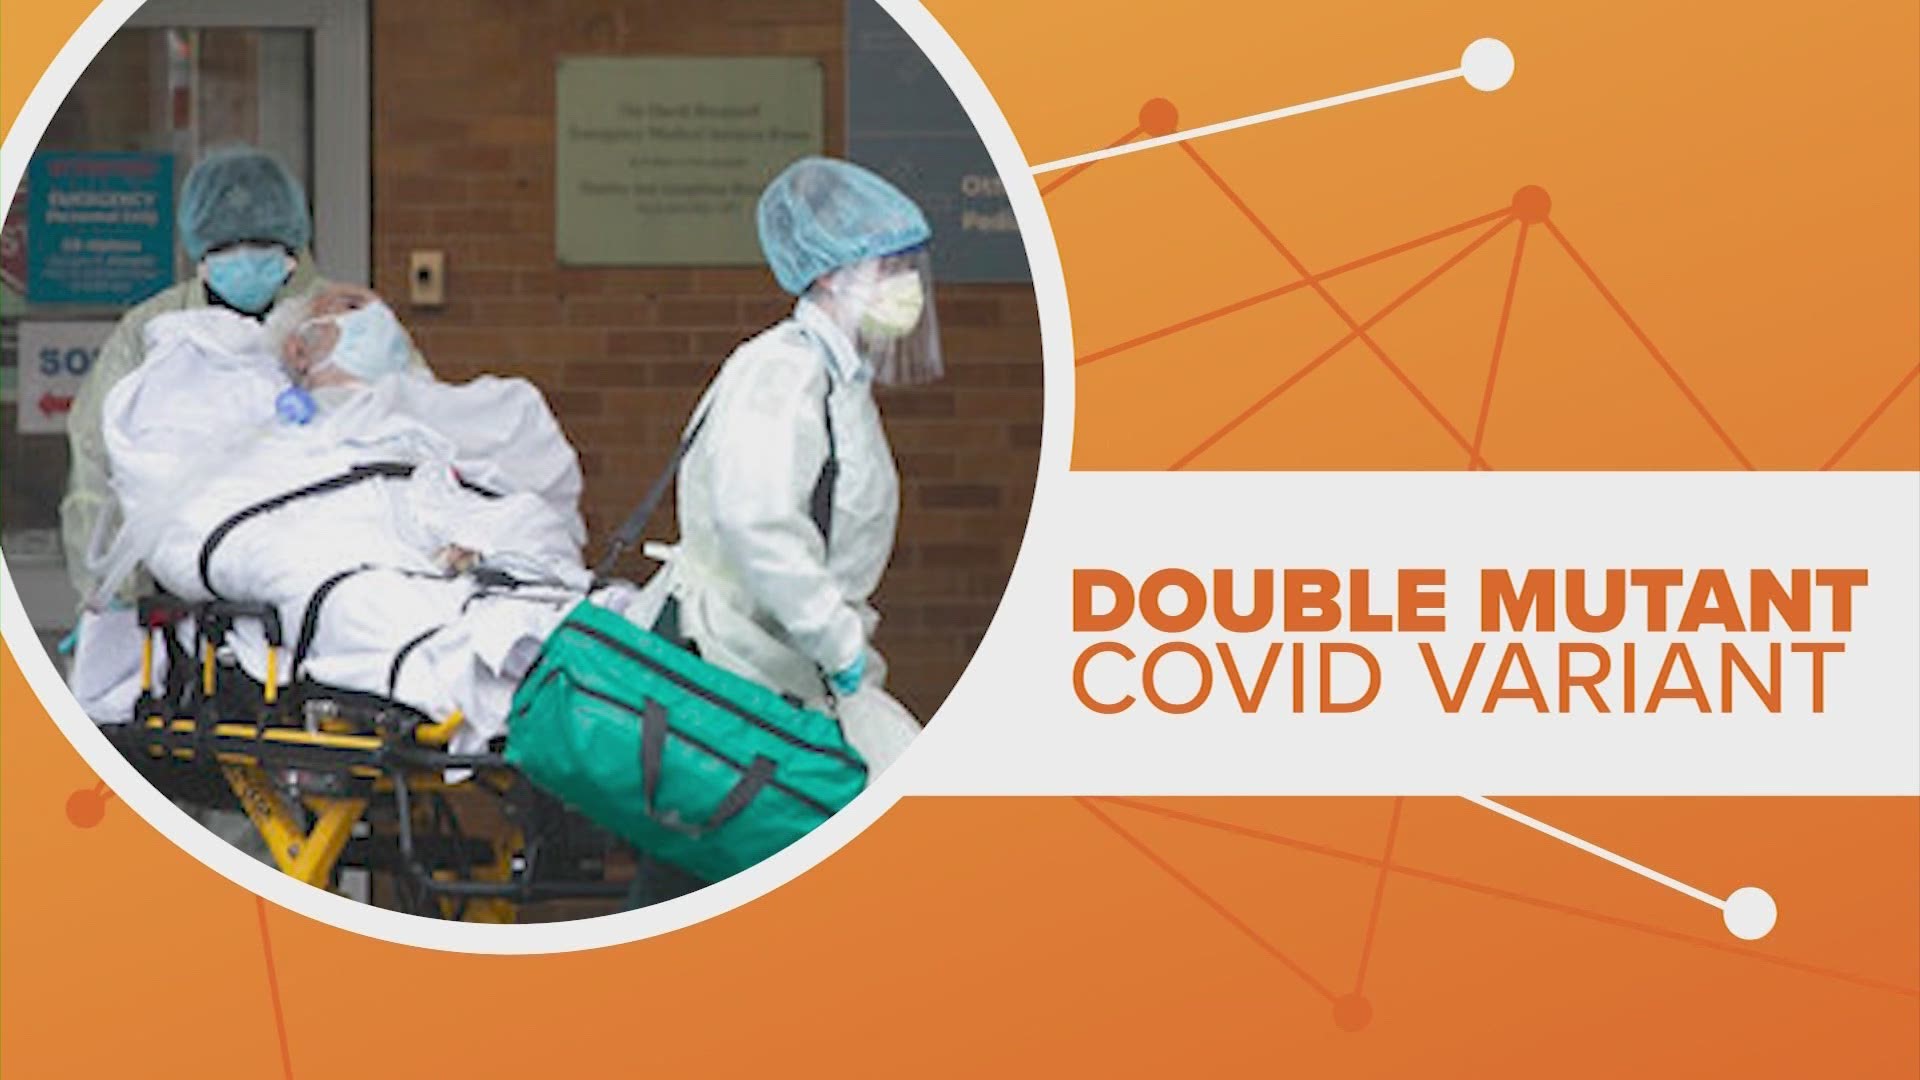 A double mutant COVID variant found in California has many researchers concerned. First found in India, the variant may or may not be immune to current vaccines.